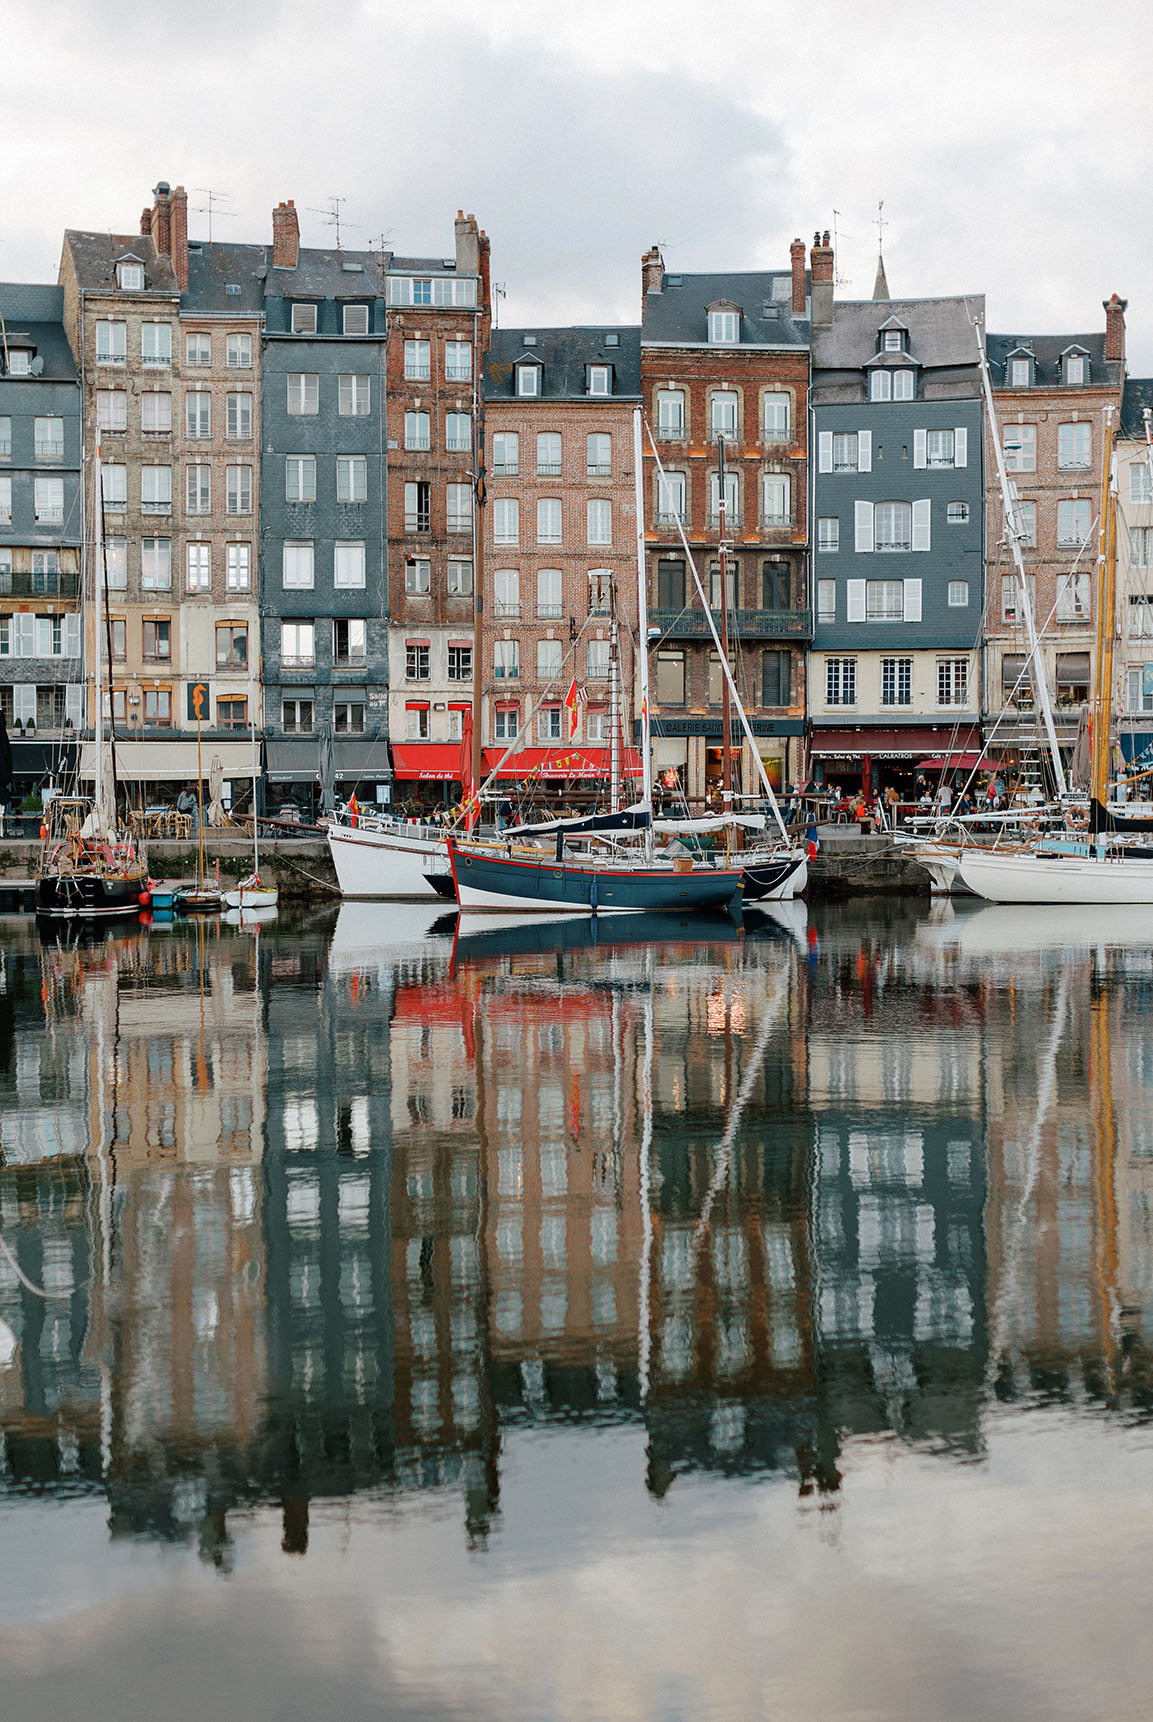 Landscape image of tall, multistory homes and docked boats in a French canal